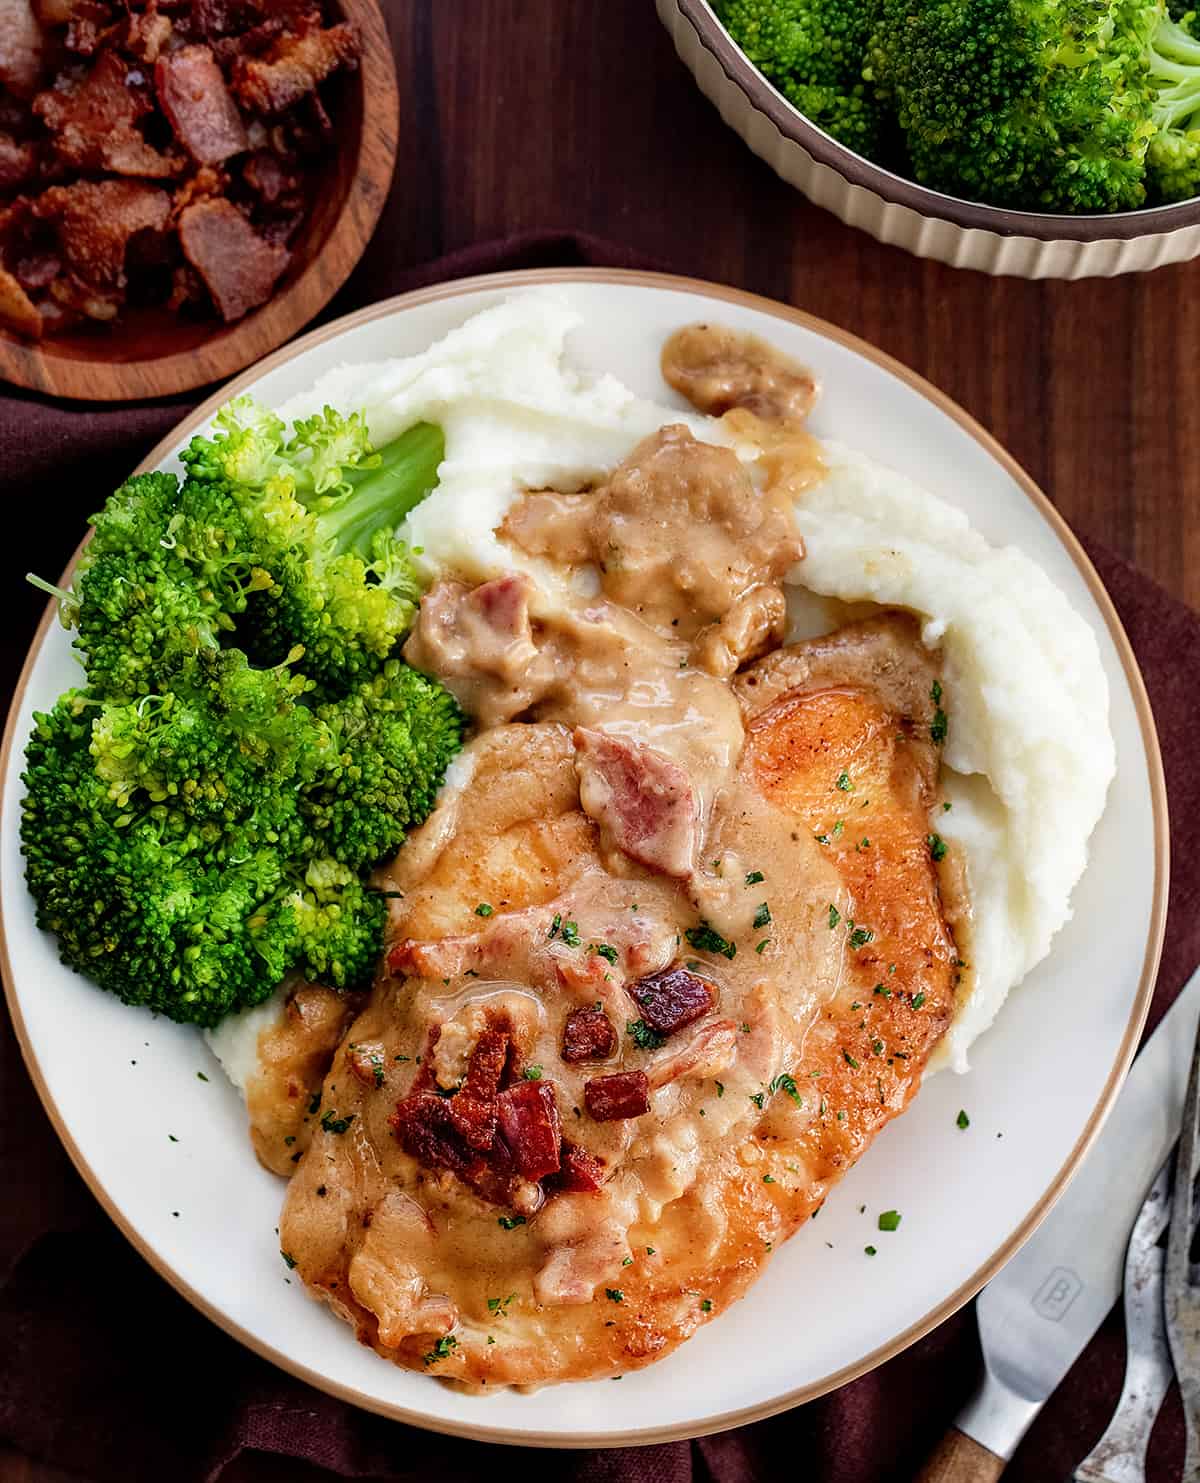 Plate of Smothered Chicken with Mashed Potatoes and Broccoli.